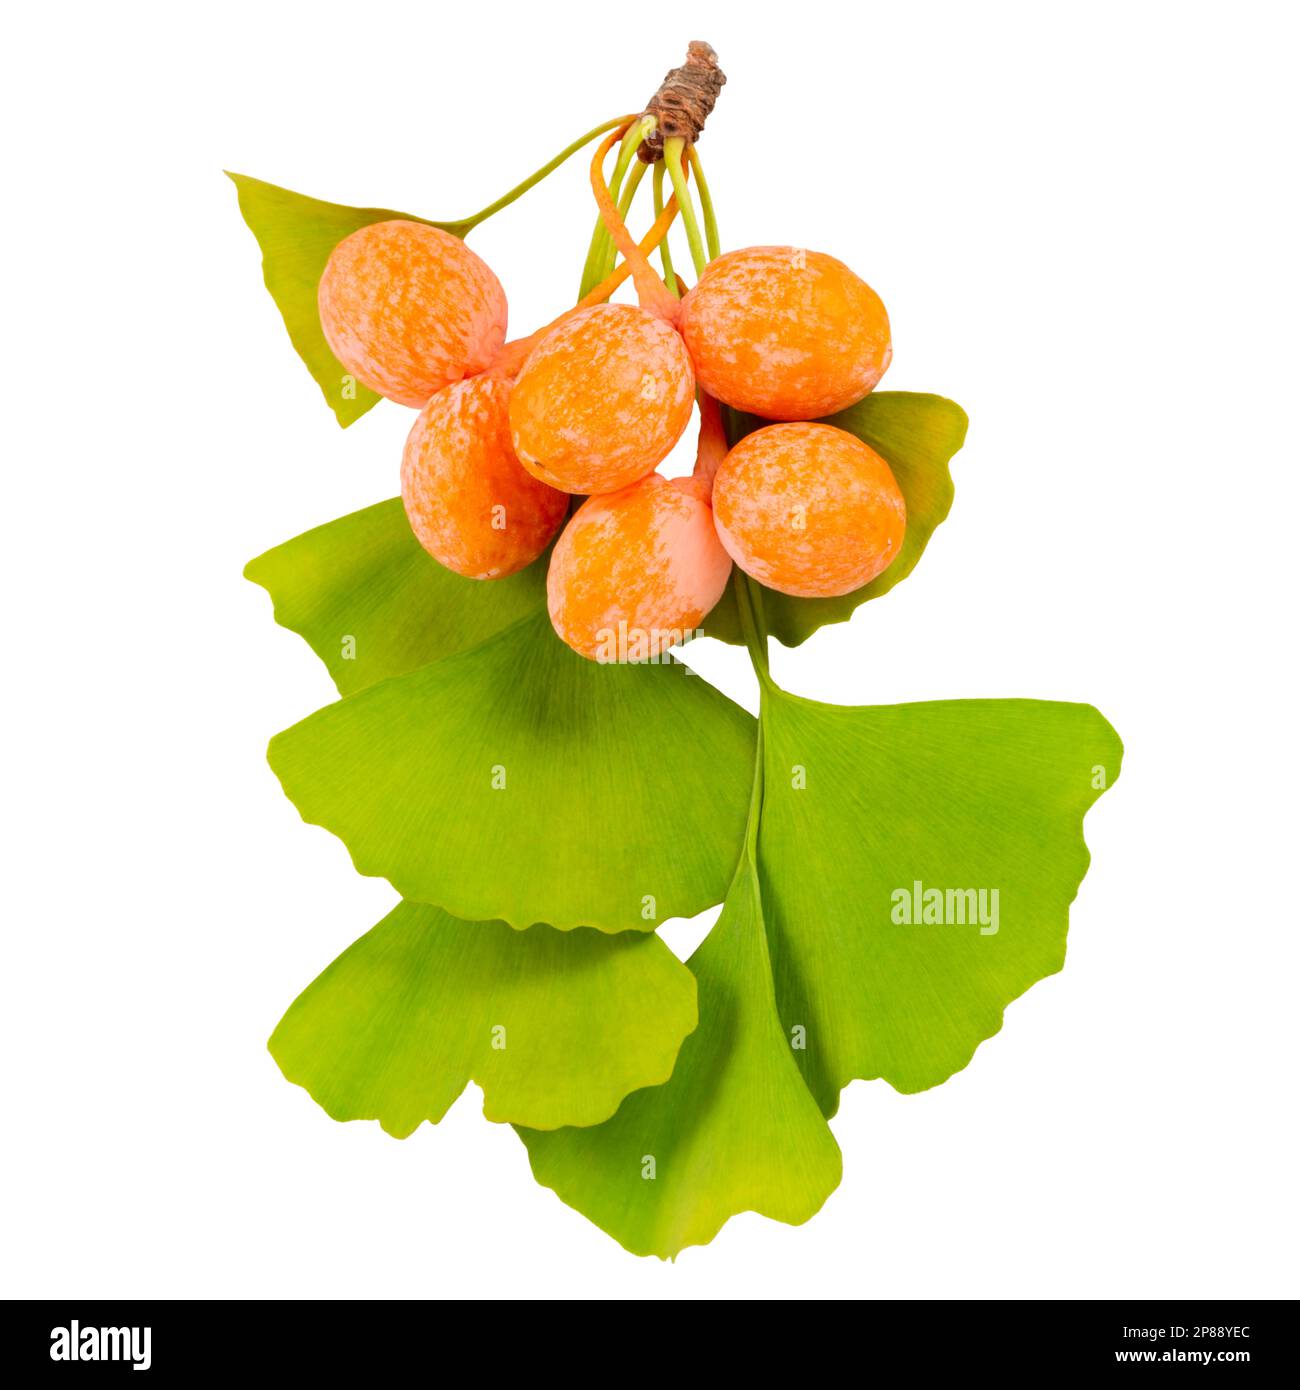 Ginkgo biloba ripe yellow fruits and green leaves is isolated on white background. Stock Photo